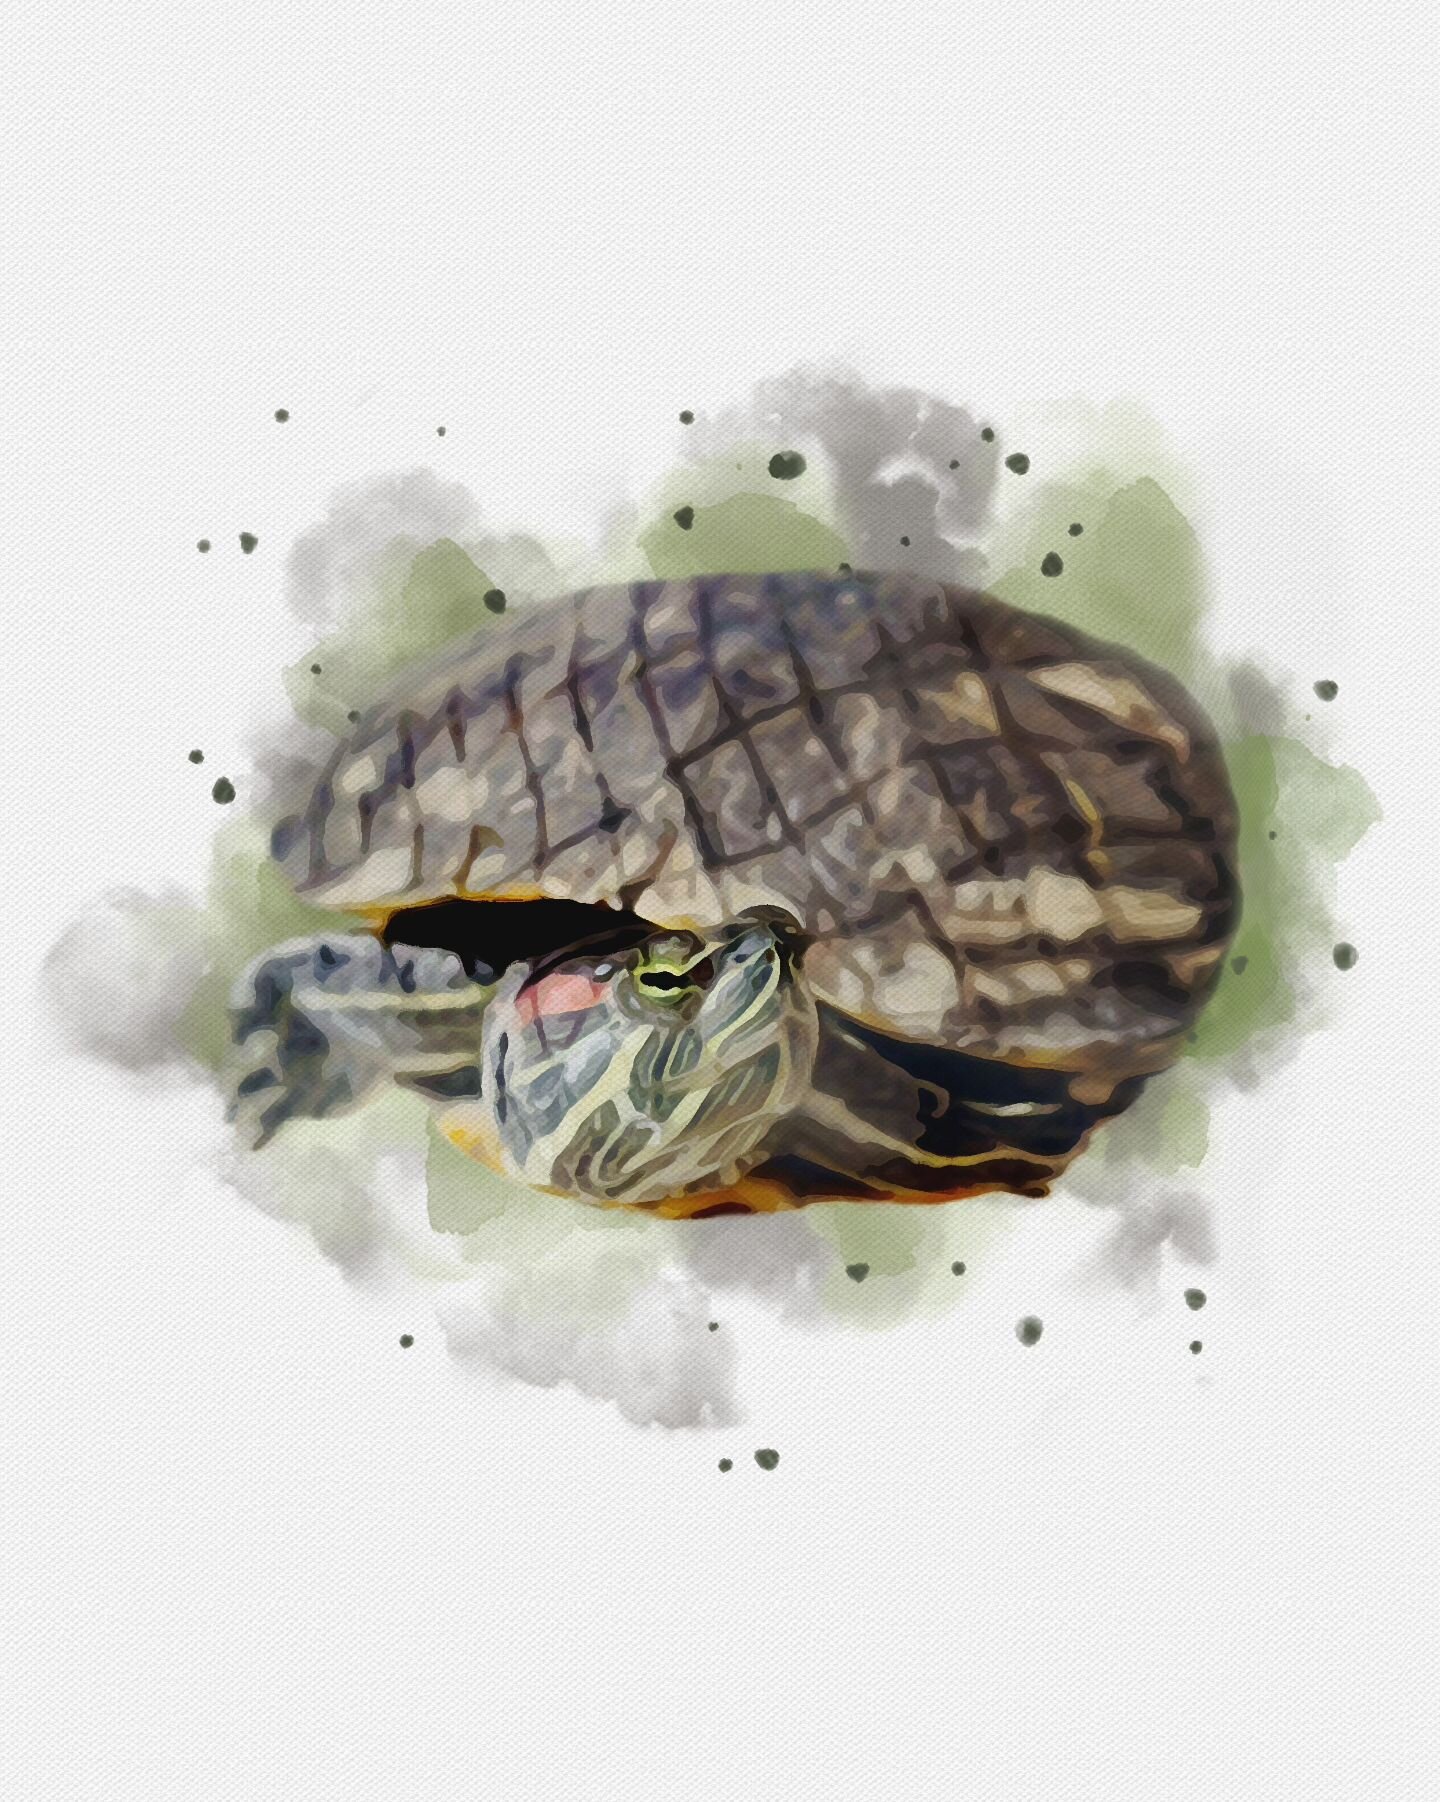 💚 H A V E N 💚

Such a special portrait for such a special turtle! We had so much fun doing this memorial portrait and just love when an unusual (less common that is) pet comes our way! 🥰

RIP sweet Haven. Thanks so much for your trust again Madiso